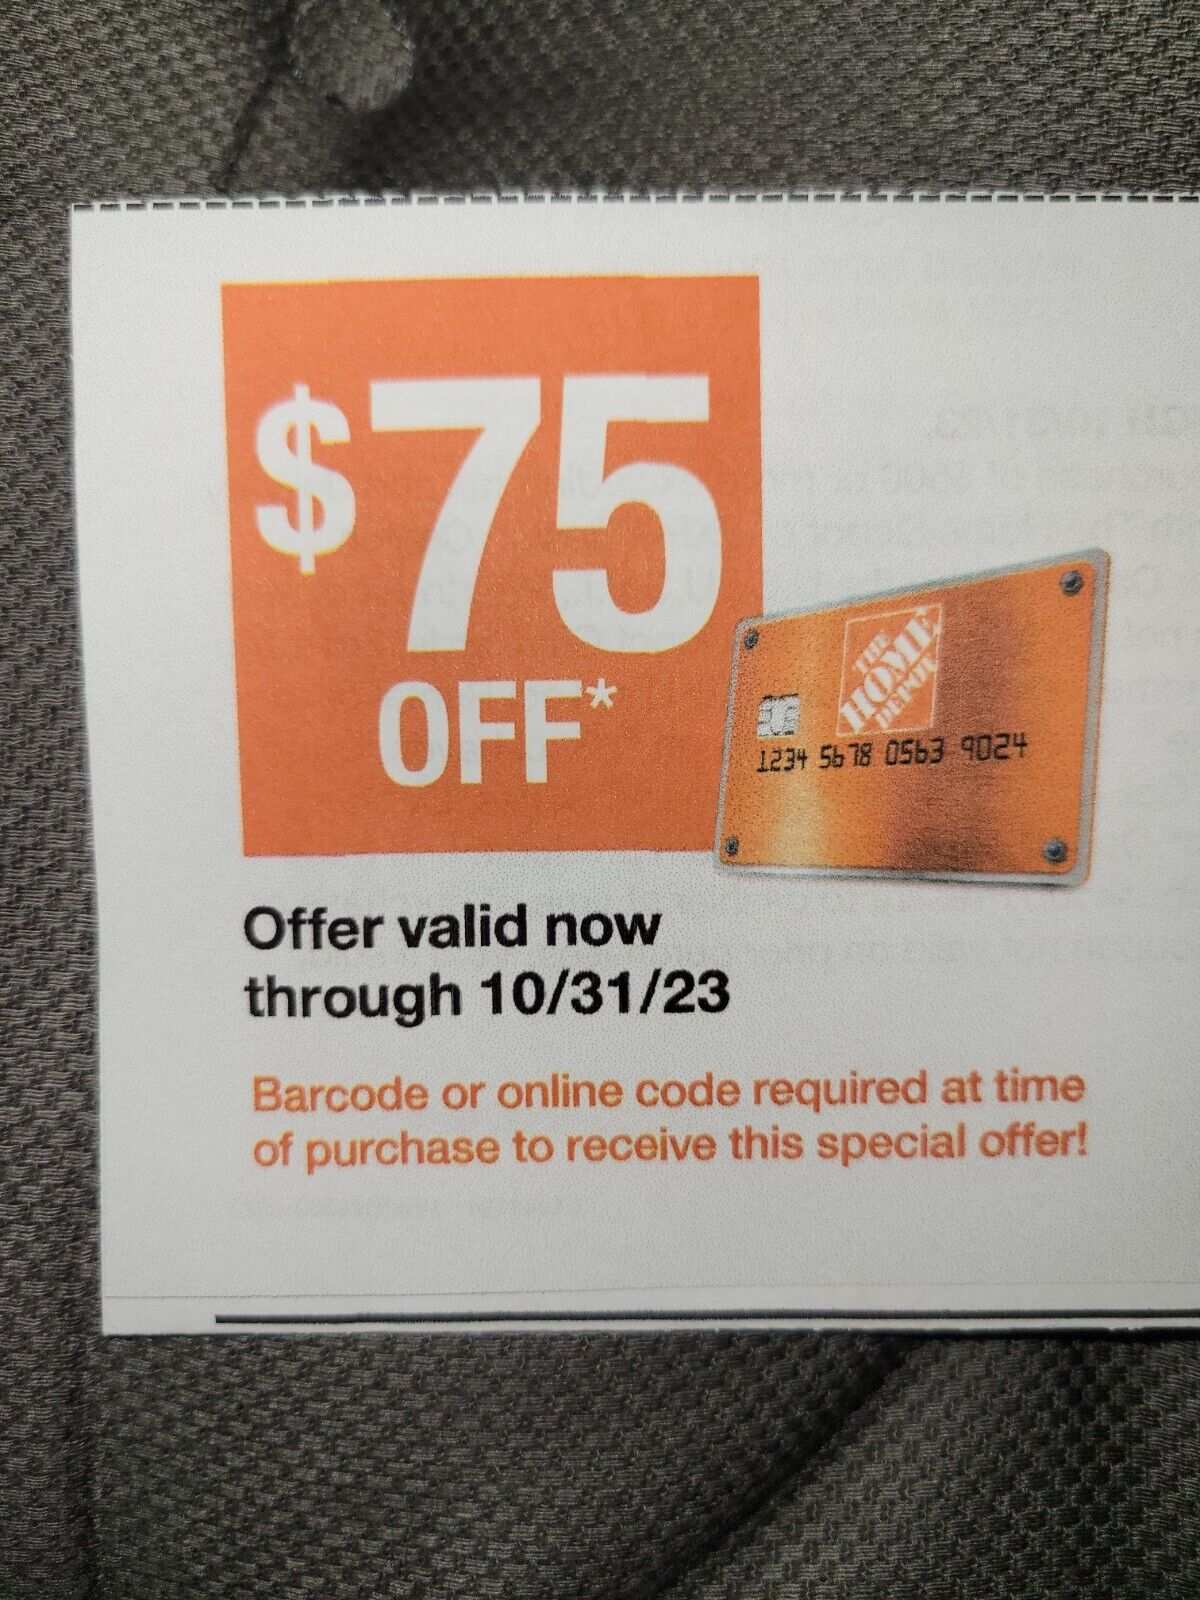 Home Depot Coupon - $75 Off $500+ w/HD Credit Card - Store & Online Exp 10/31/23